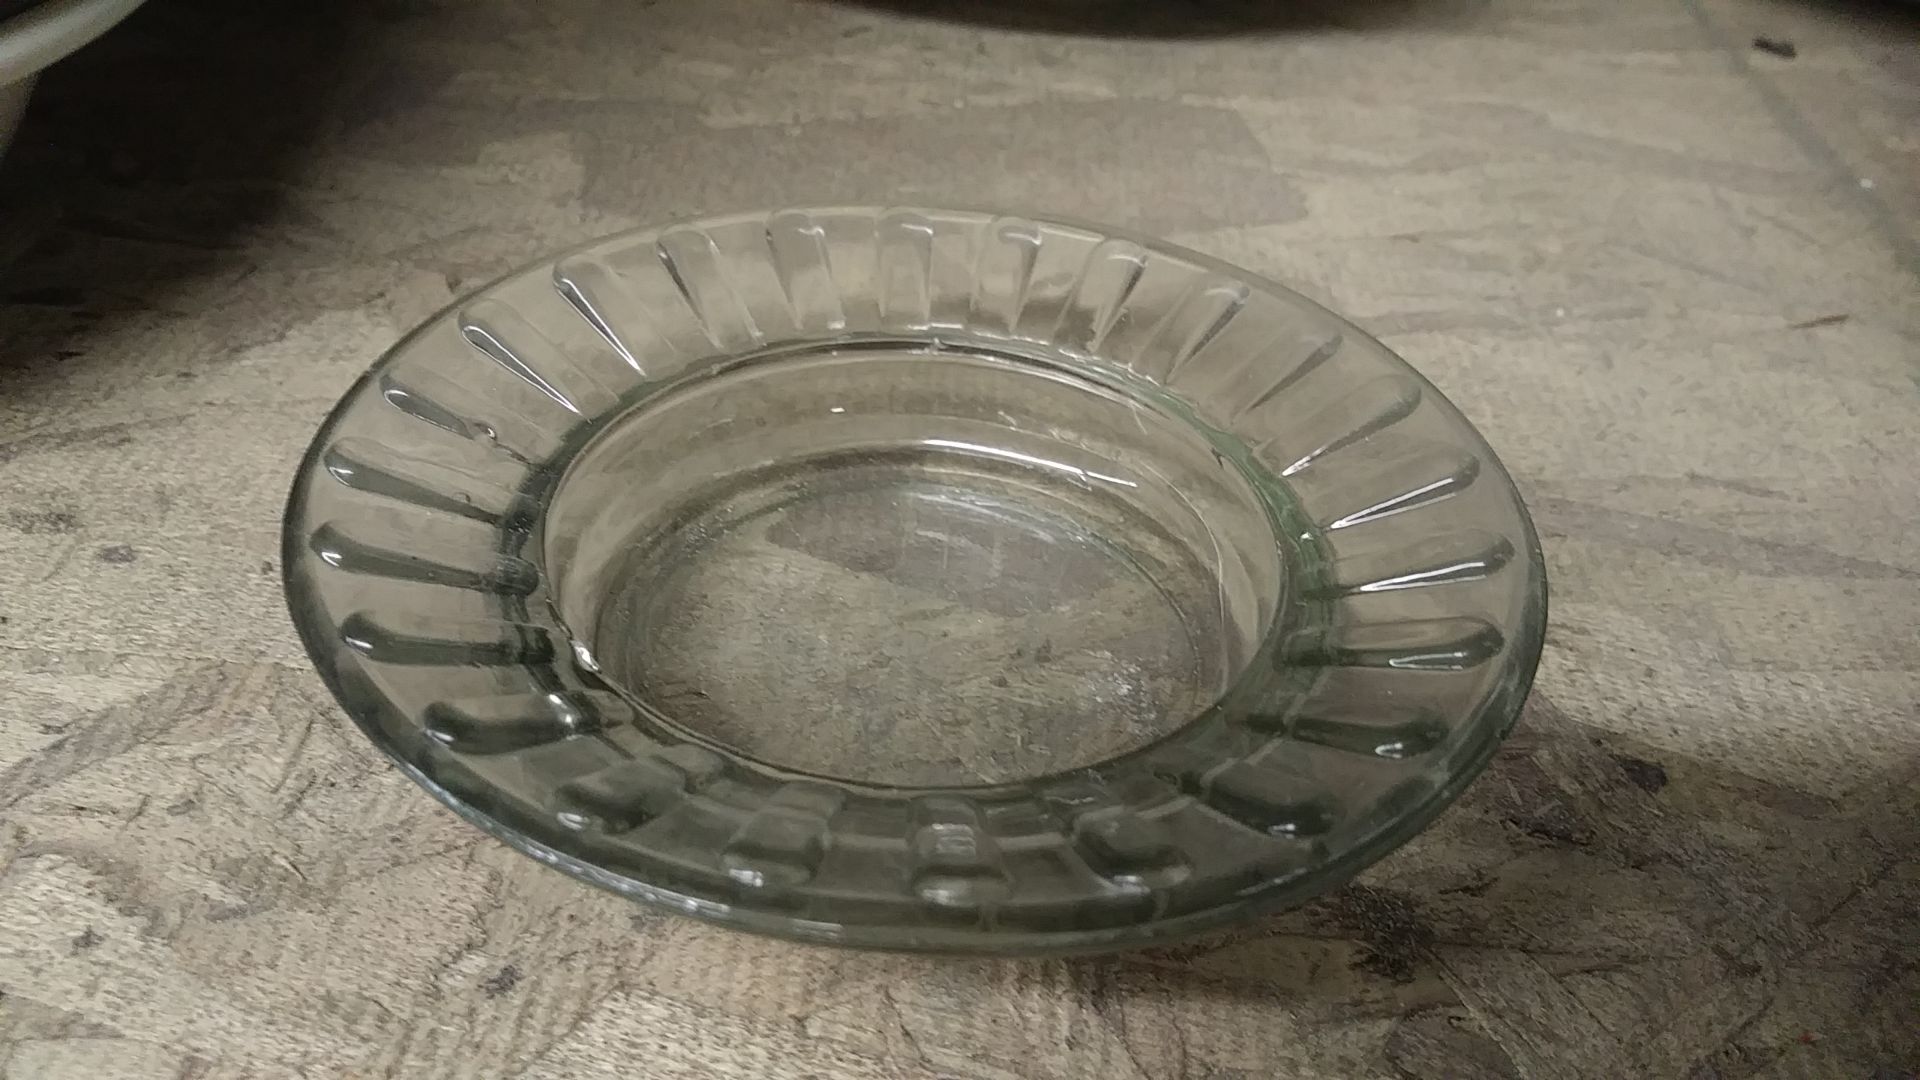 ASSORTED 4" DIA ROUND GLASS ASHTRAYS (includes QTY 39 in this lot)